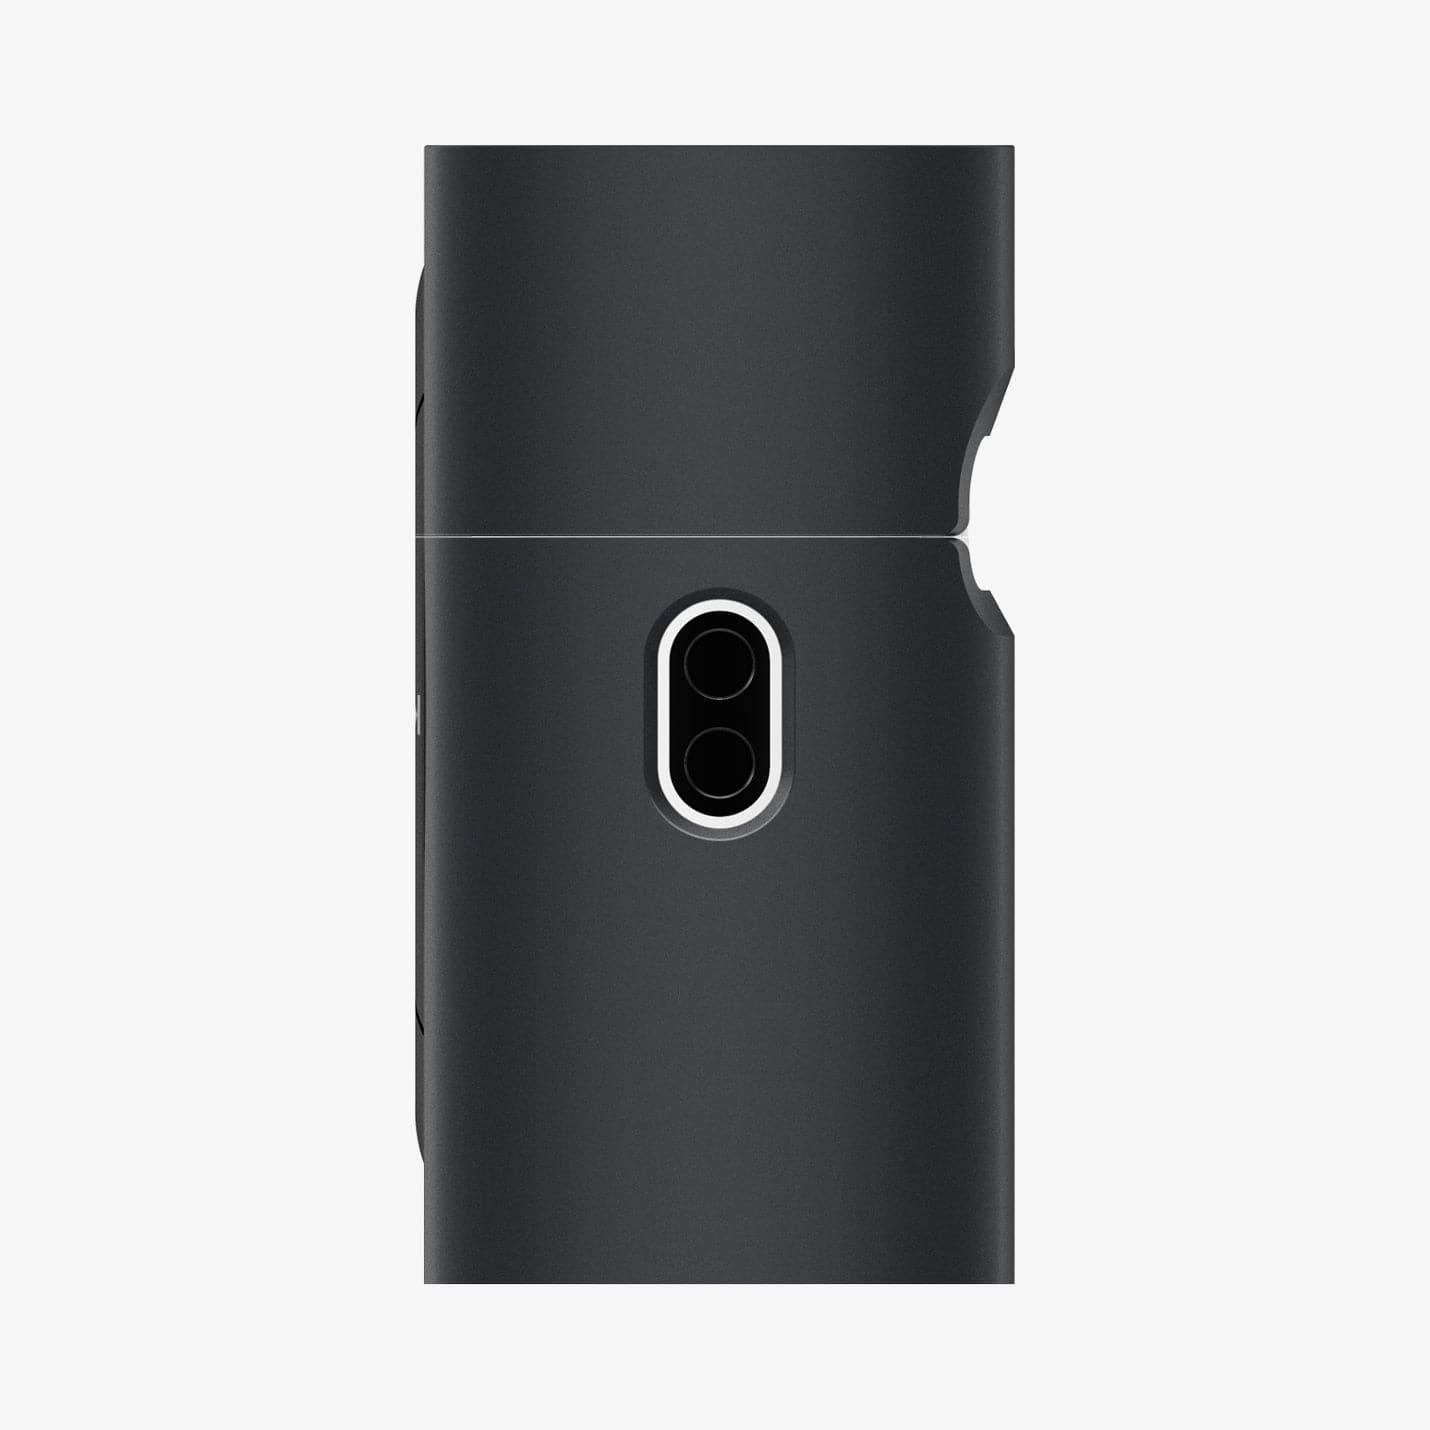 ACS05486 - Apple AirPods Pro 2 Case Classic Shuffle in charcoal showing the side